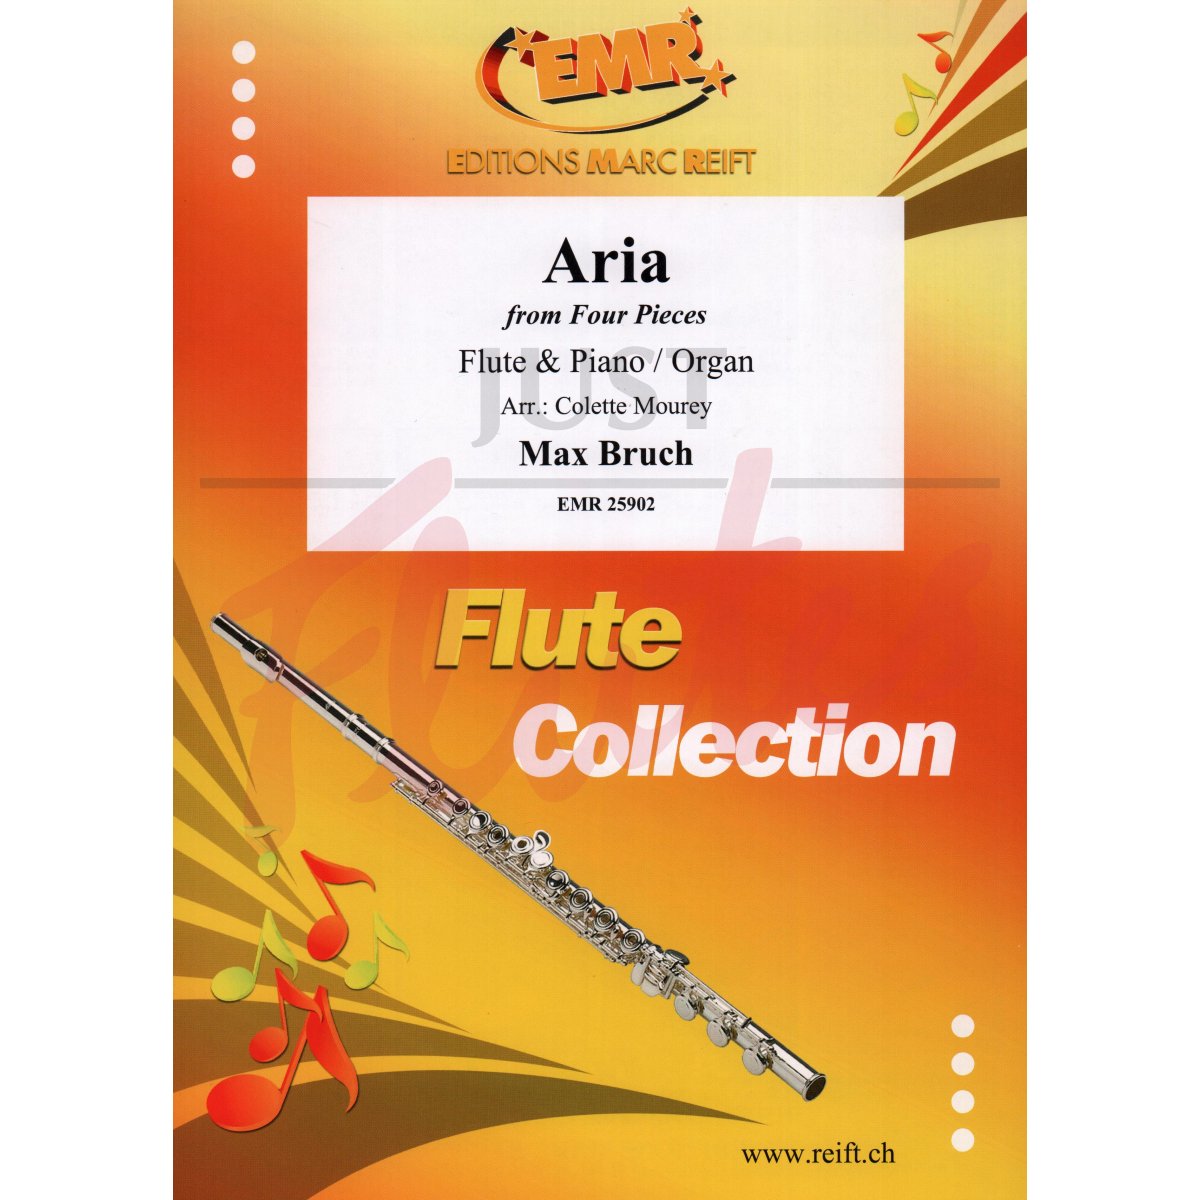 Aria from Four Pieces for Flute and Piano